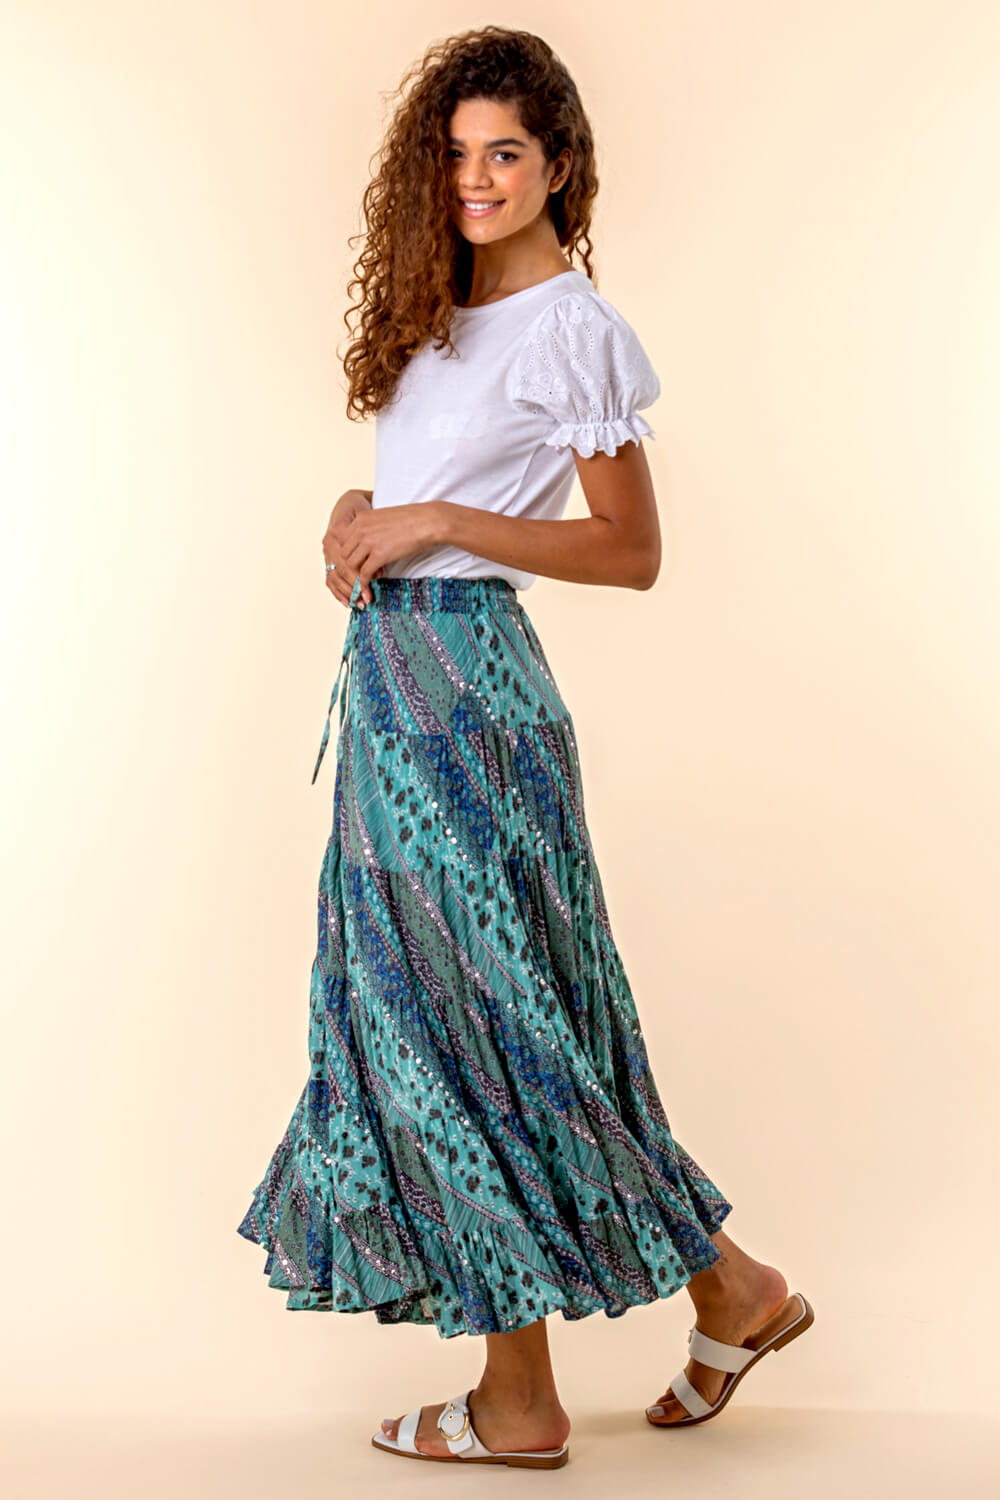 Turquoise Paisley Print Sequin Embellished Skirt, Image 3 of 4